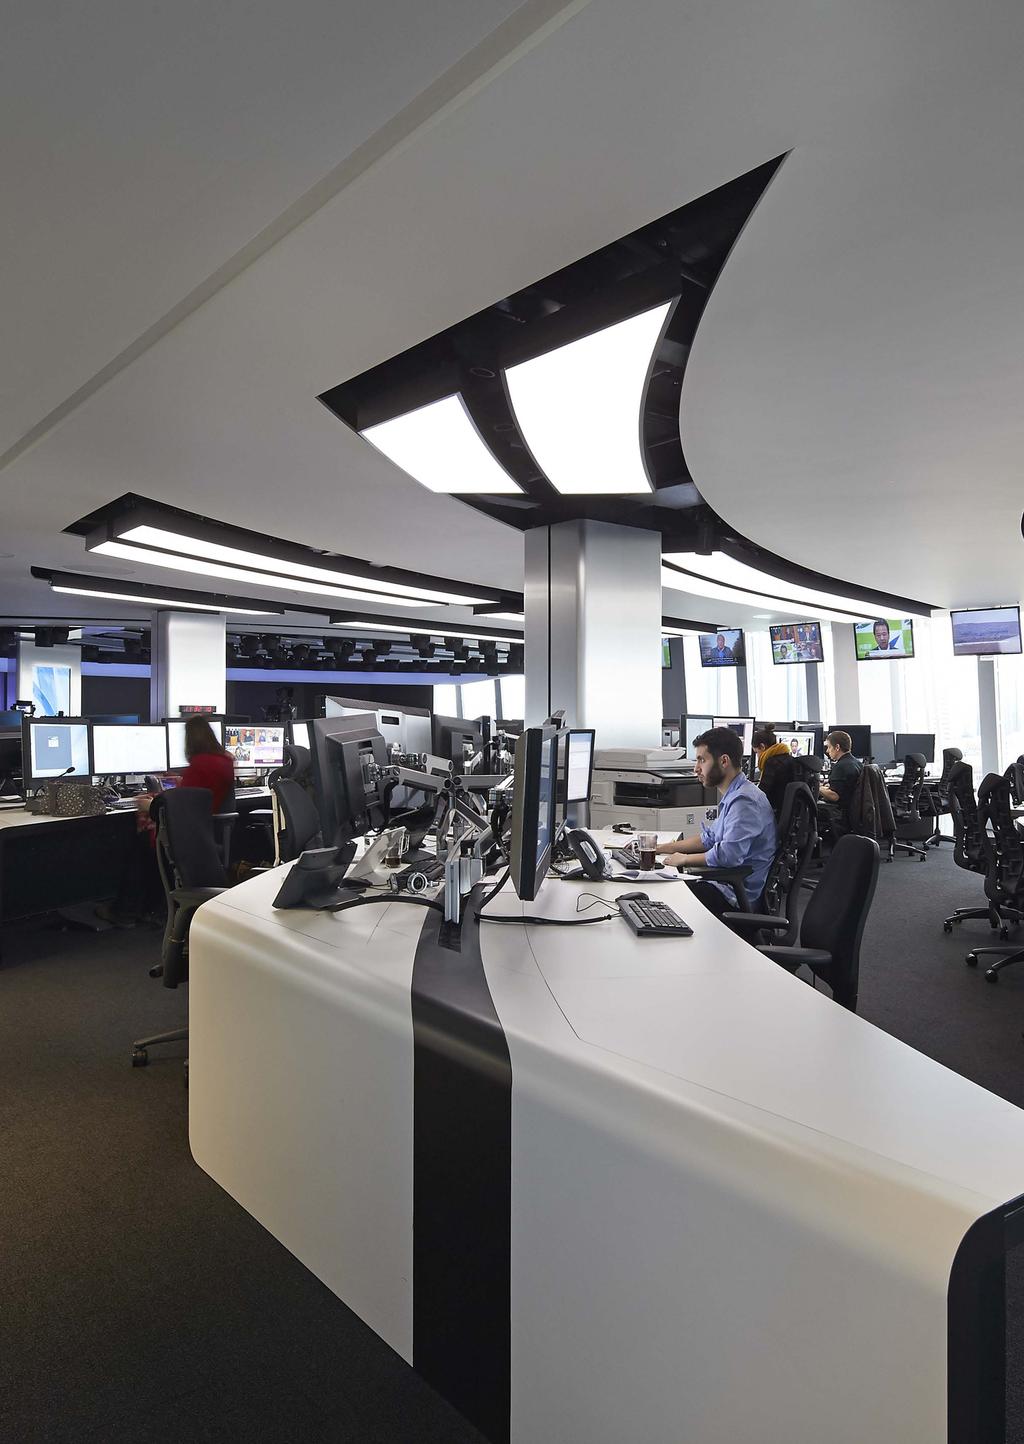 The available space challenge: to deliver the desired number of workspaces in the newsroom without creating a closed-in feeling.